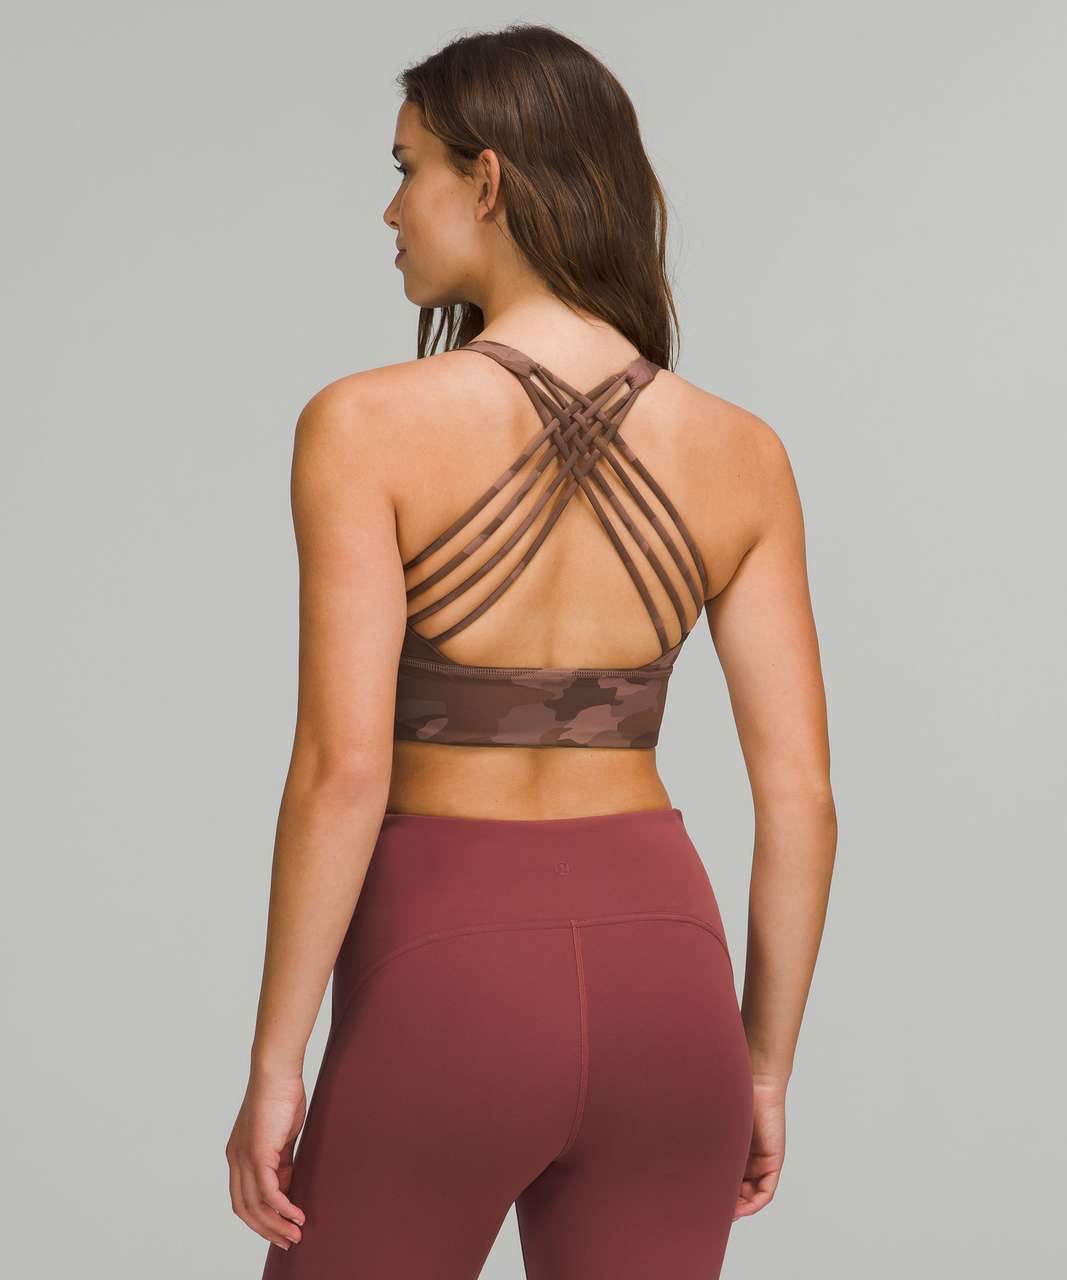 Lululemon Free to Be Longline Bra - Wild *Light Support, A/B Cup - Heritage 365 Camo Roasted Brown Multi